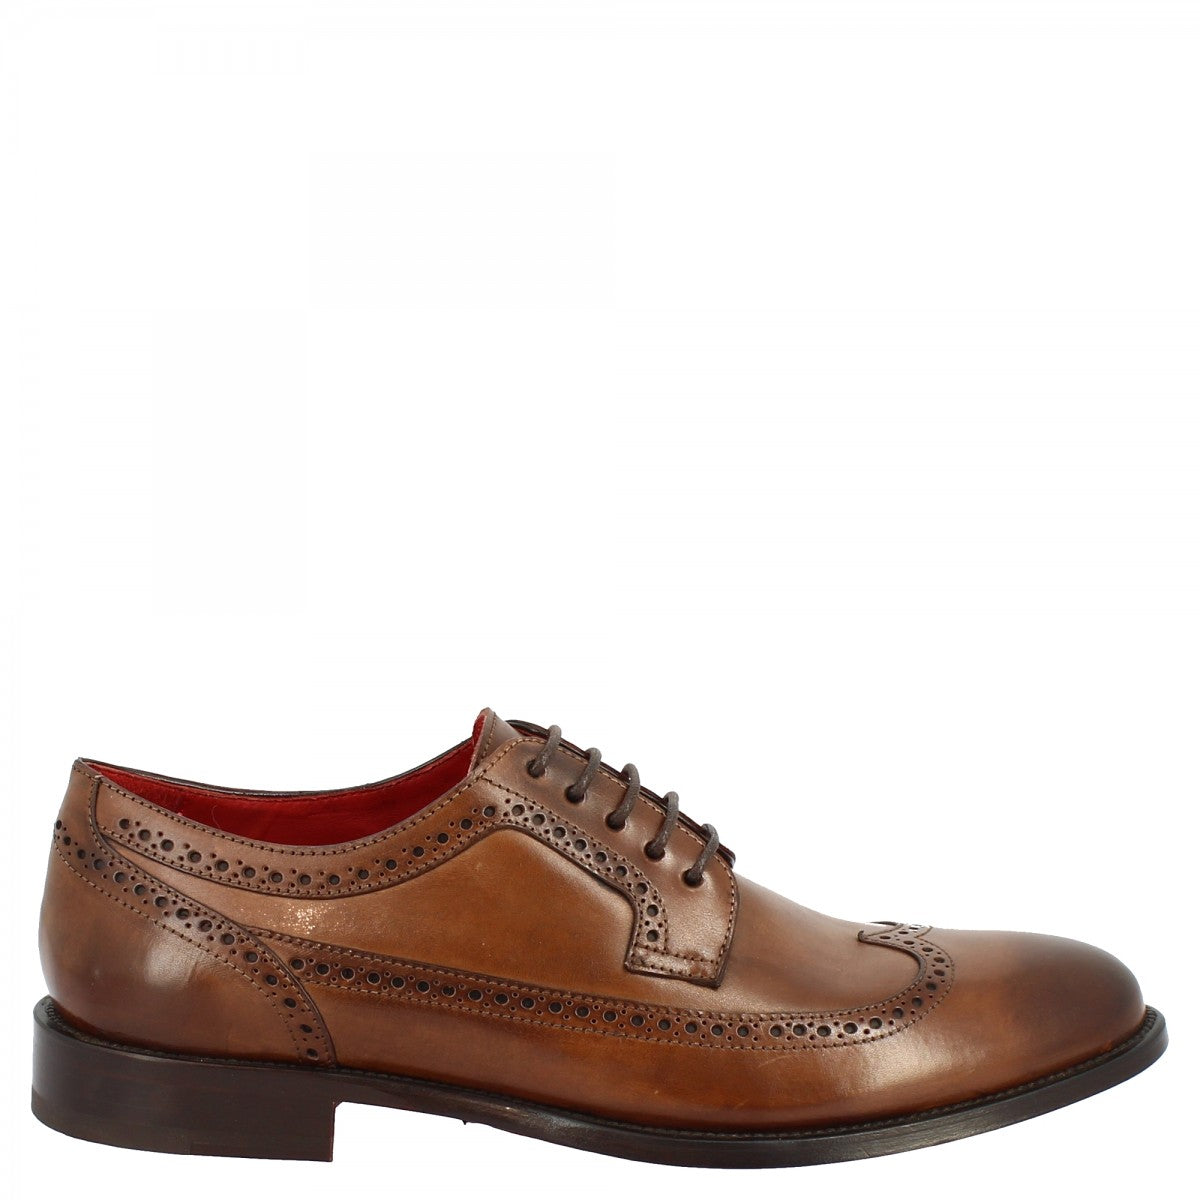 handmade lace-up brogues shoes brandy calf leather